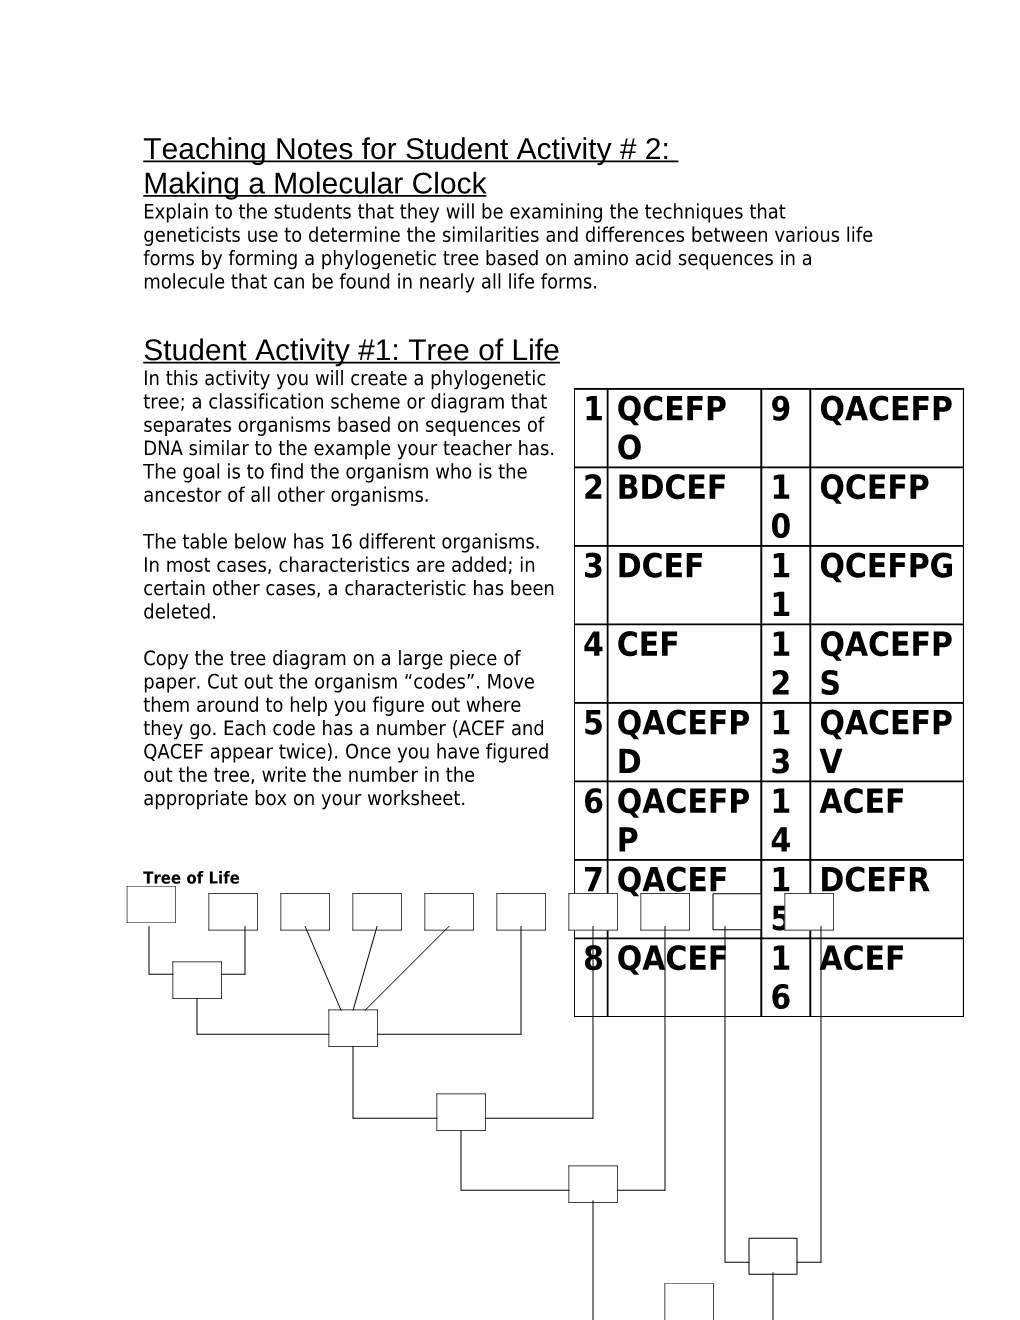 Teaching Notes for Student Activity # 2: Making a Molecular Clock